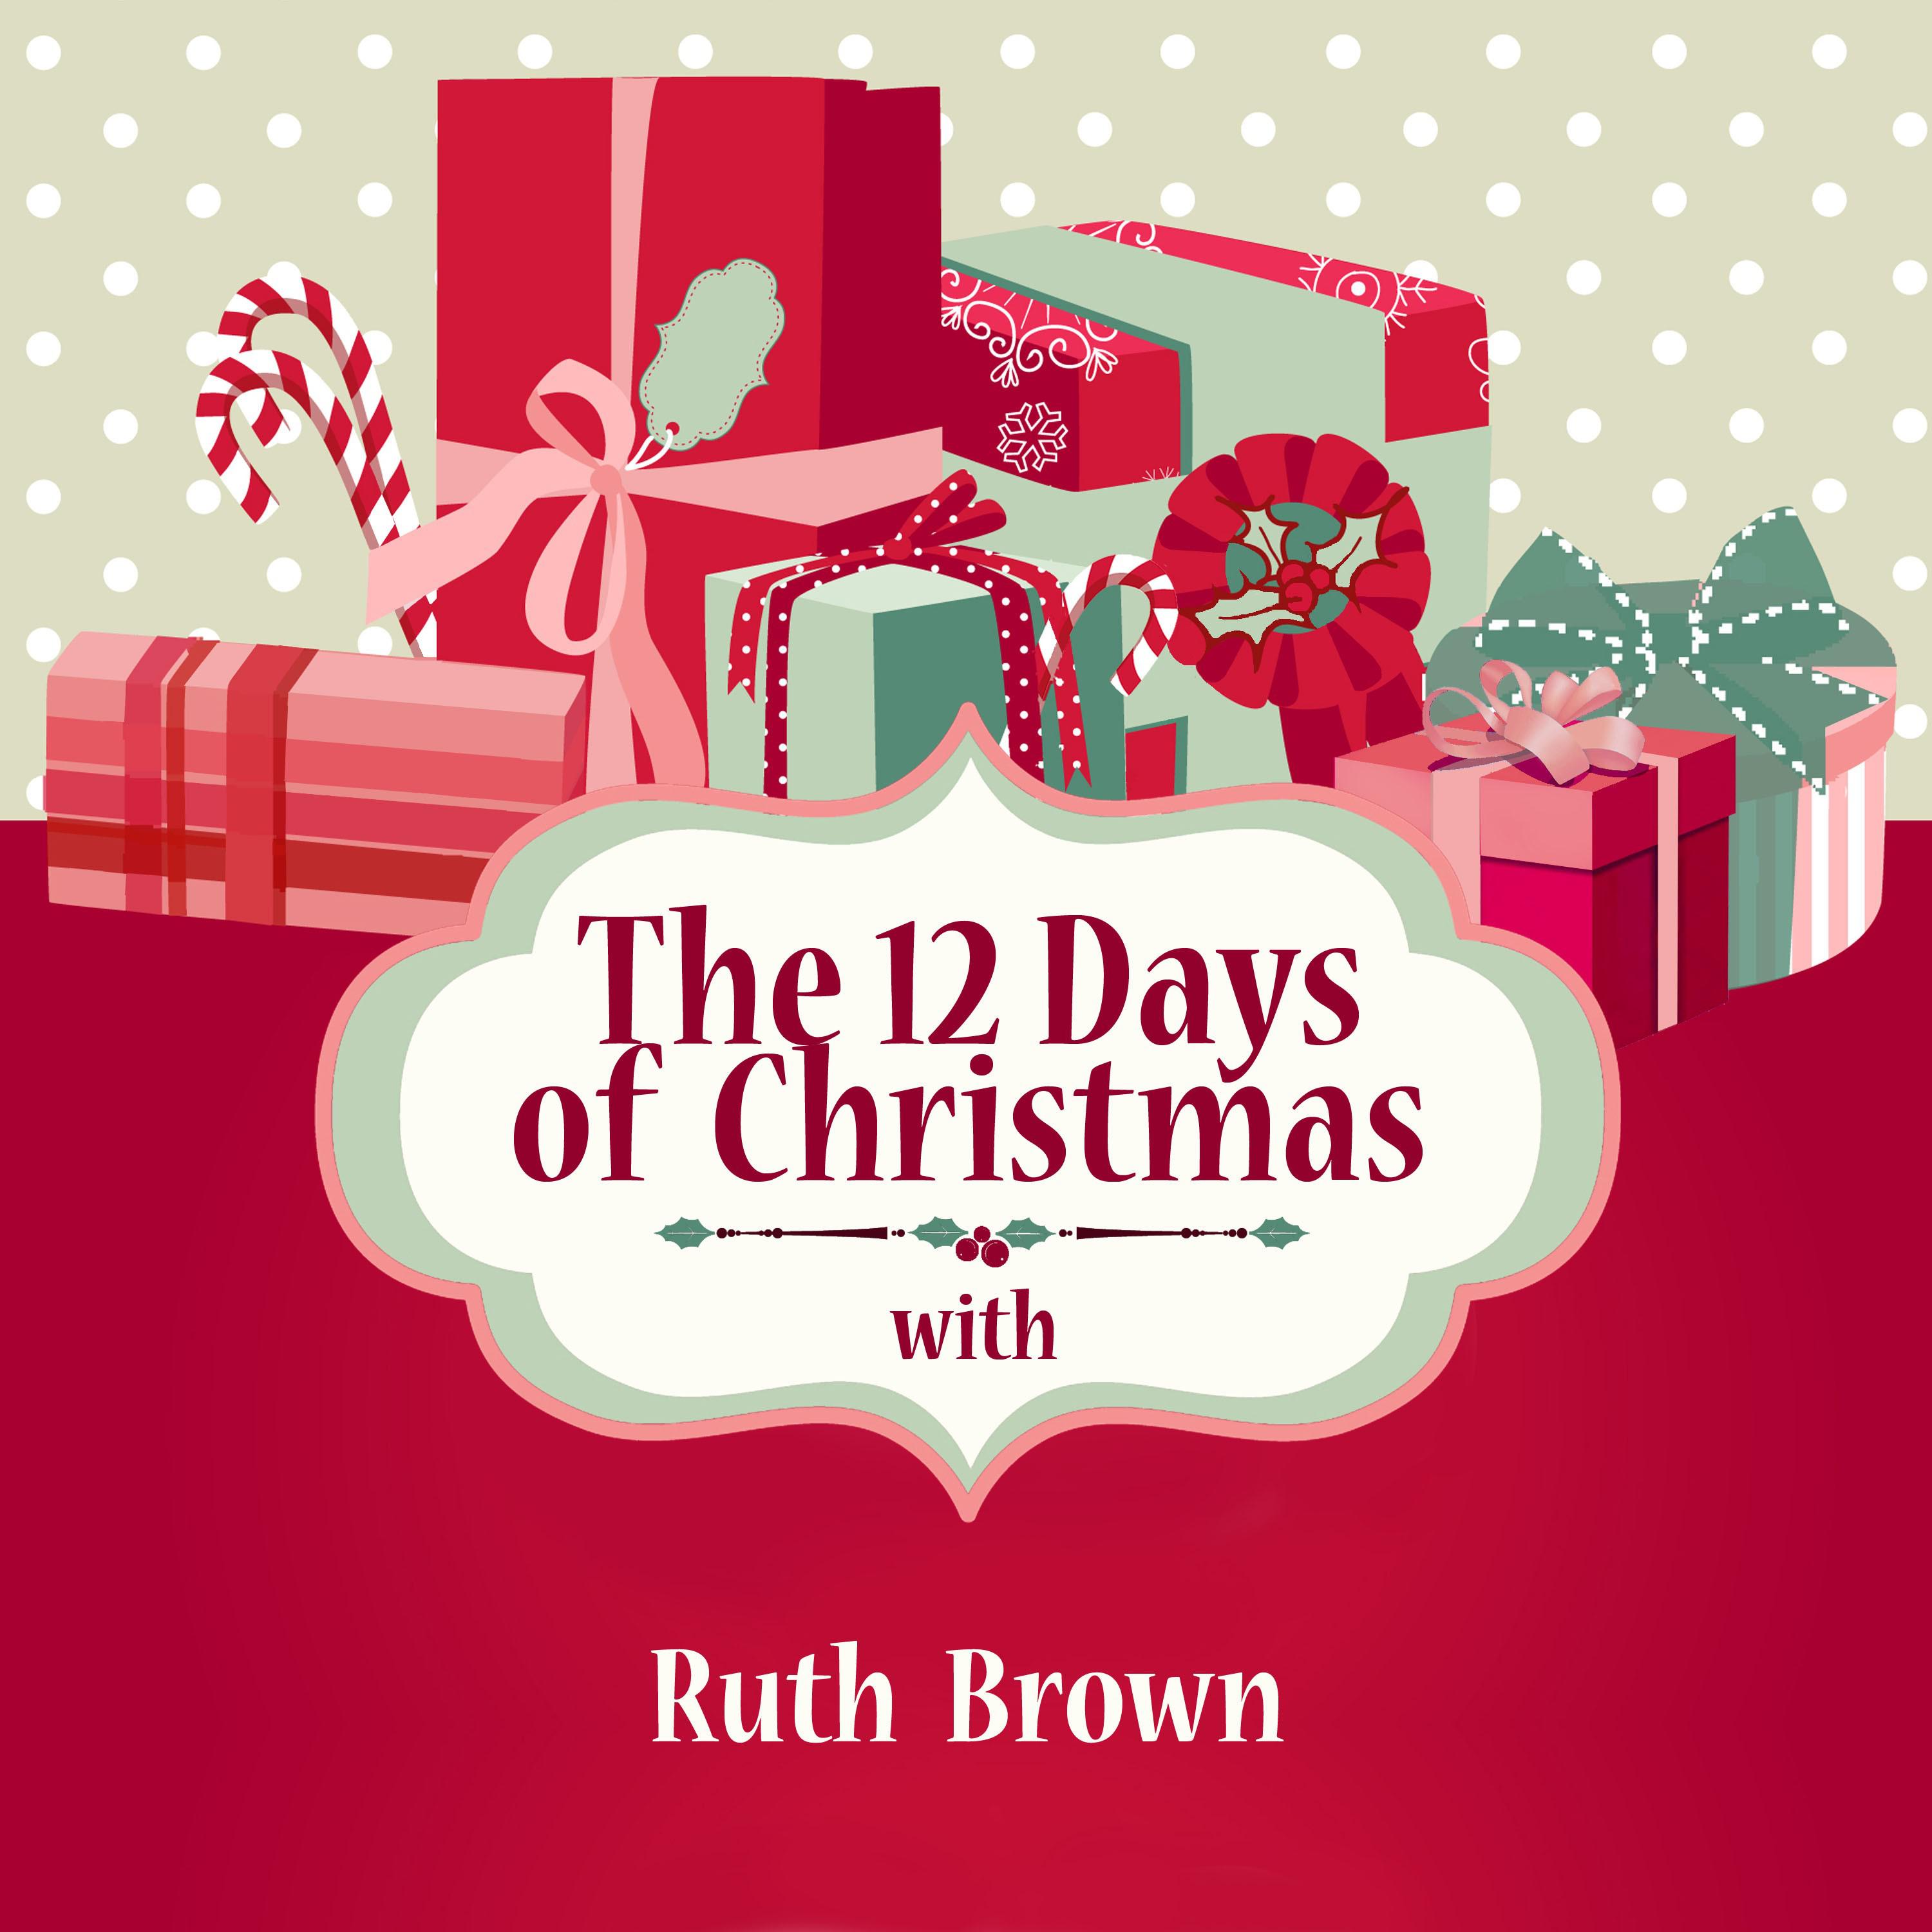 The 12 Days of Christmas with Ruth Brown